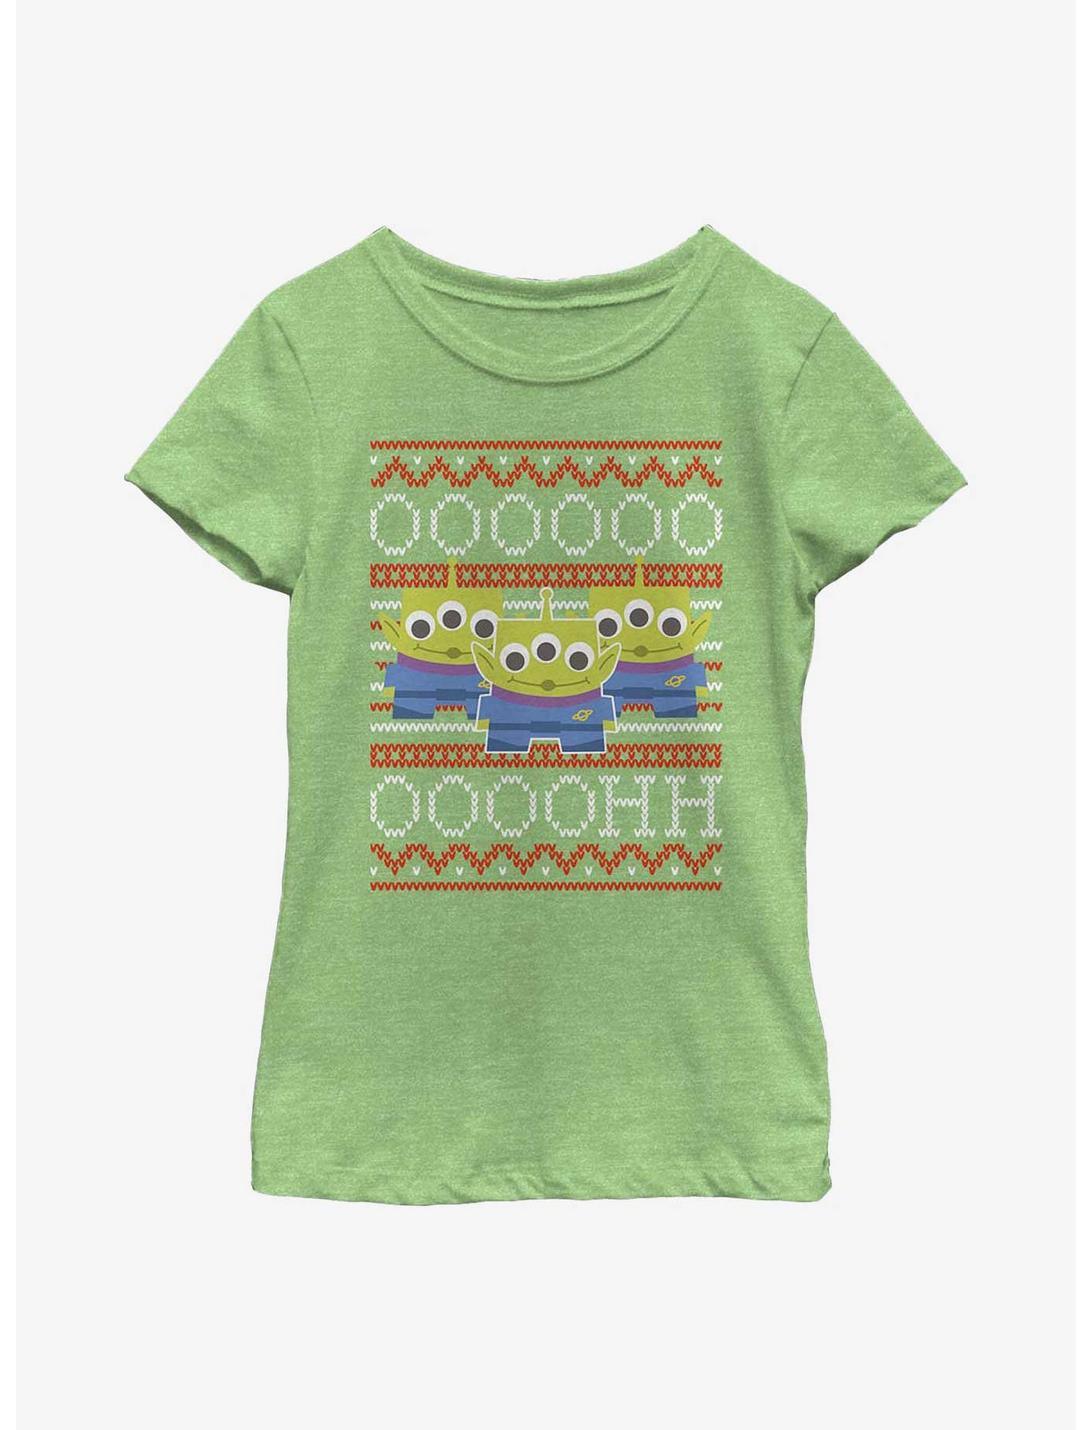 Disney Pixar Toy Story Aliens Ugly Sweater Pattern Youth Girls T-Shirt, GRN APPLE, hi-res